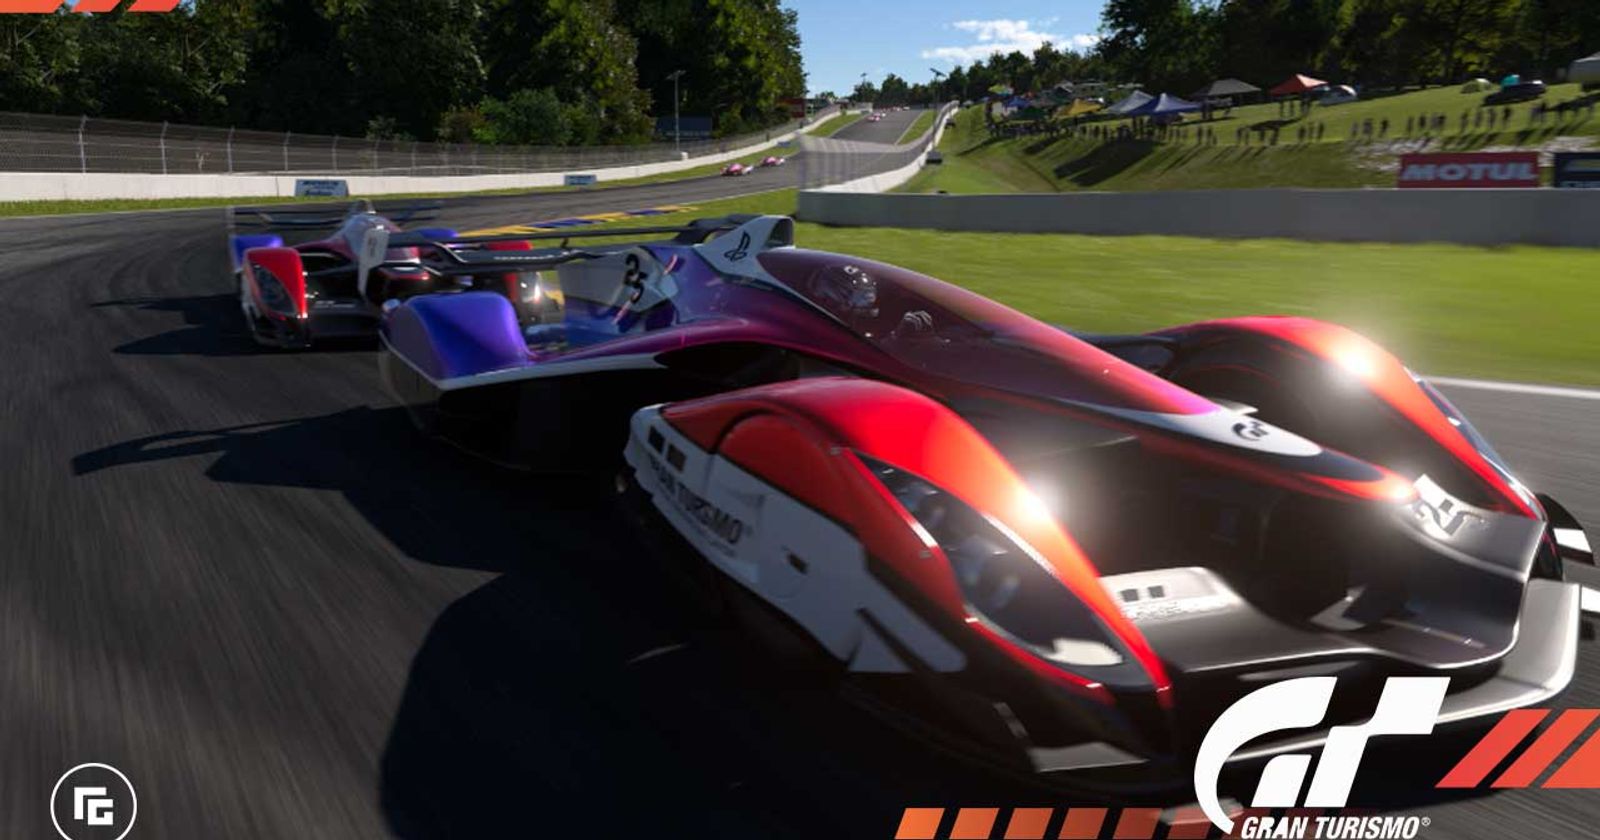 Gran Turismo 7 Update 1.26 Adds Three New Cars and the Ability to Sell  Vehicles